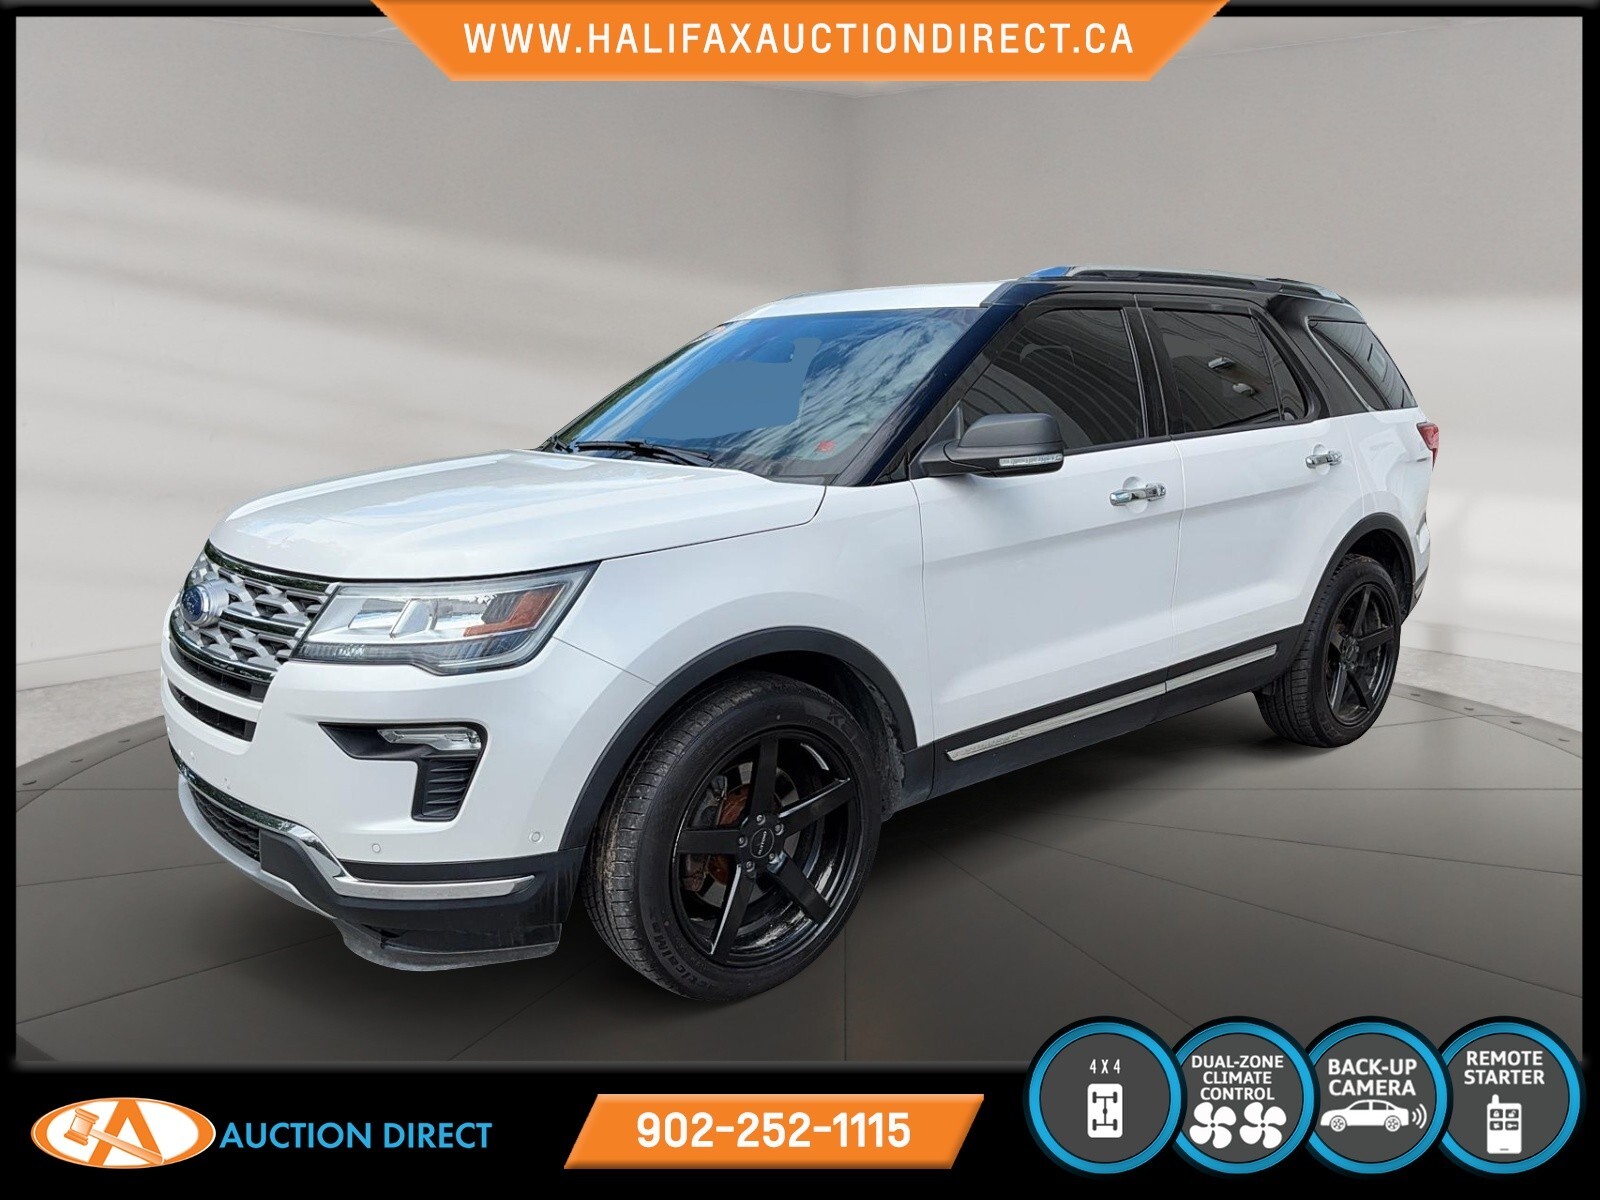 2018 Ford Explorer Limited LIMITED TRIM 4WD (FOUR WHEEL DRIVE) 3 RD. 